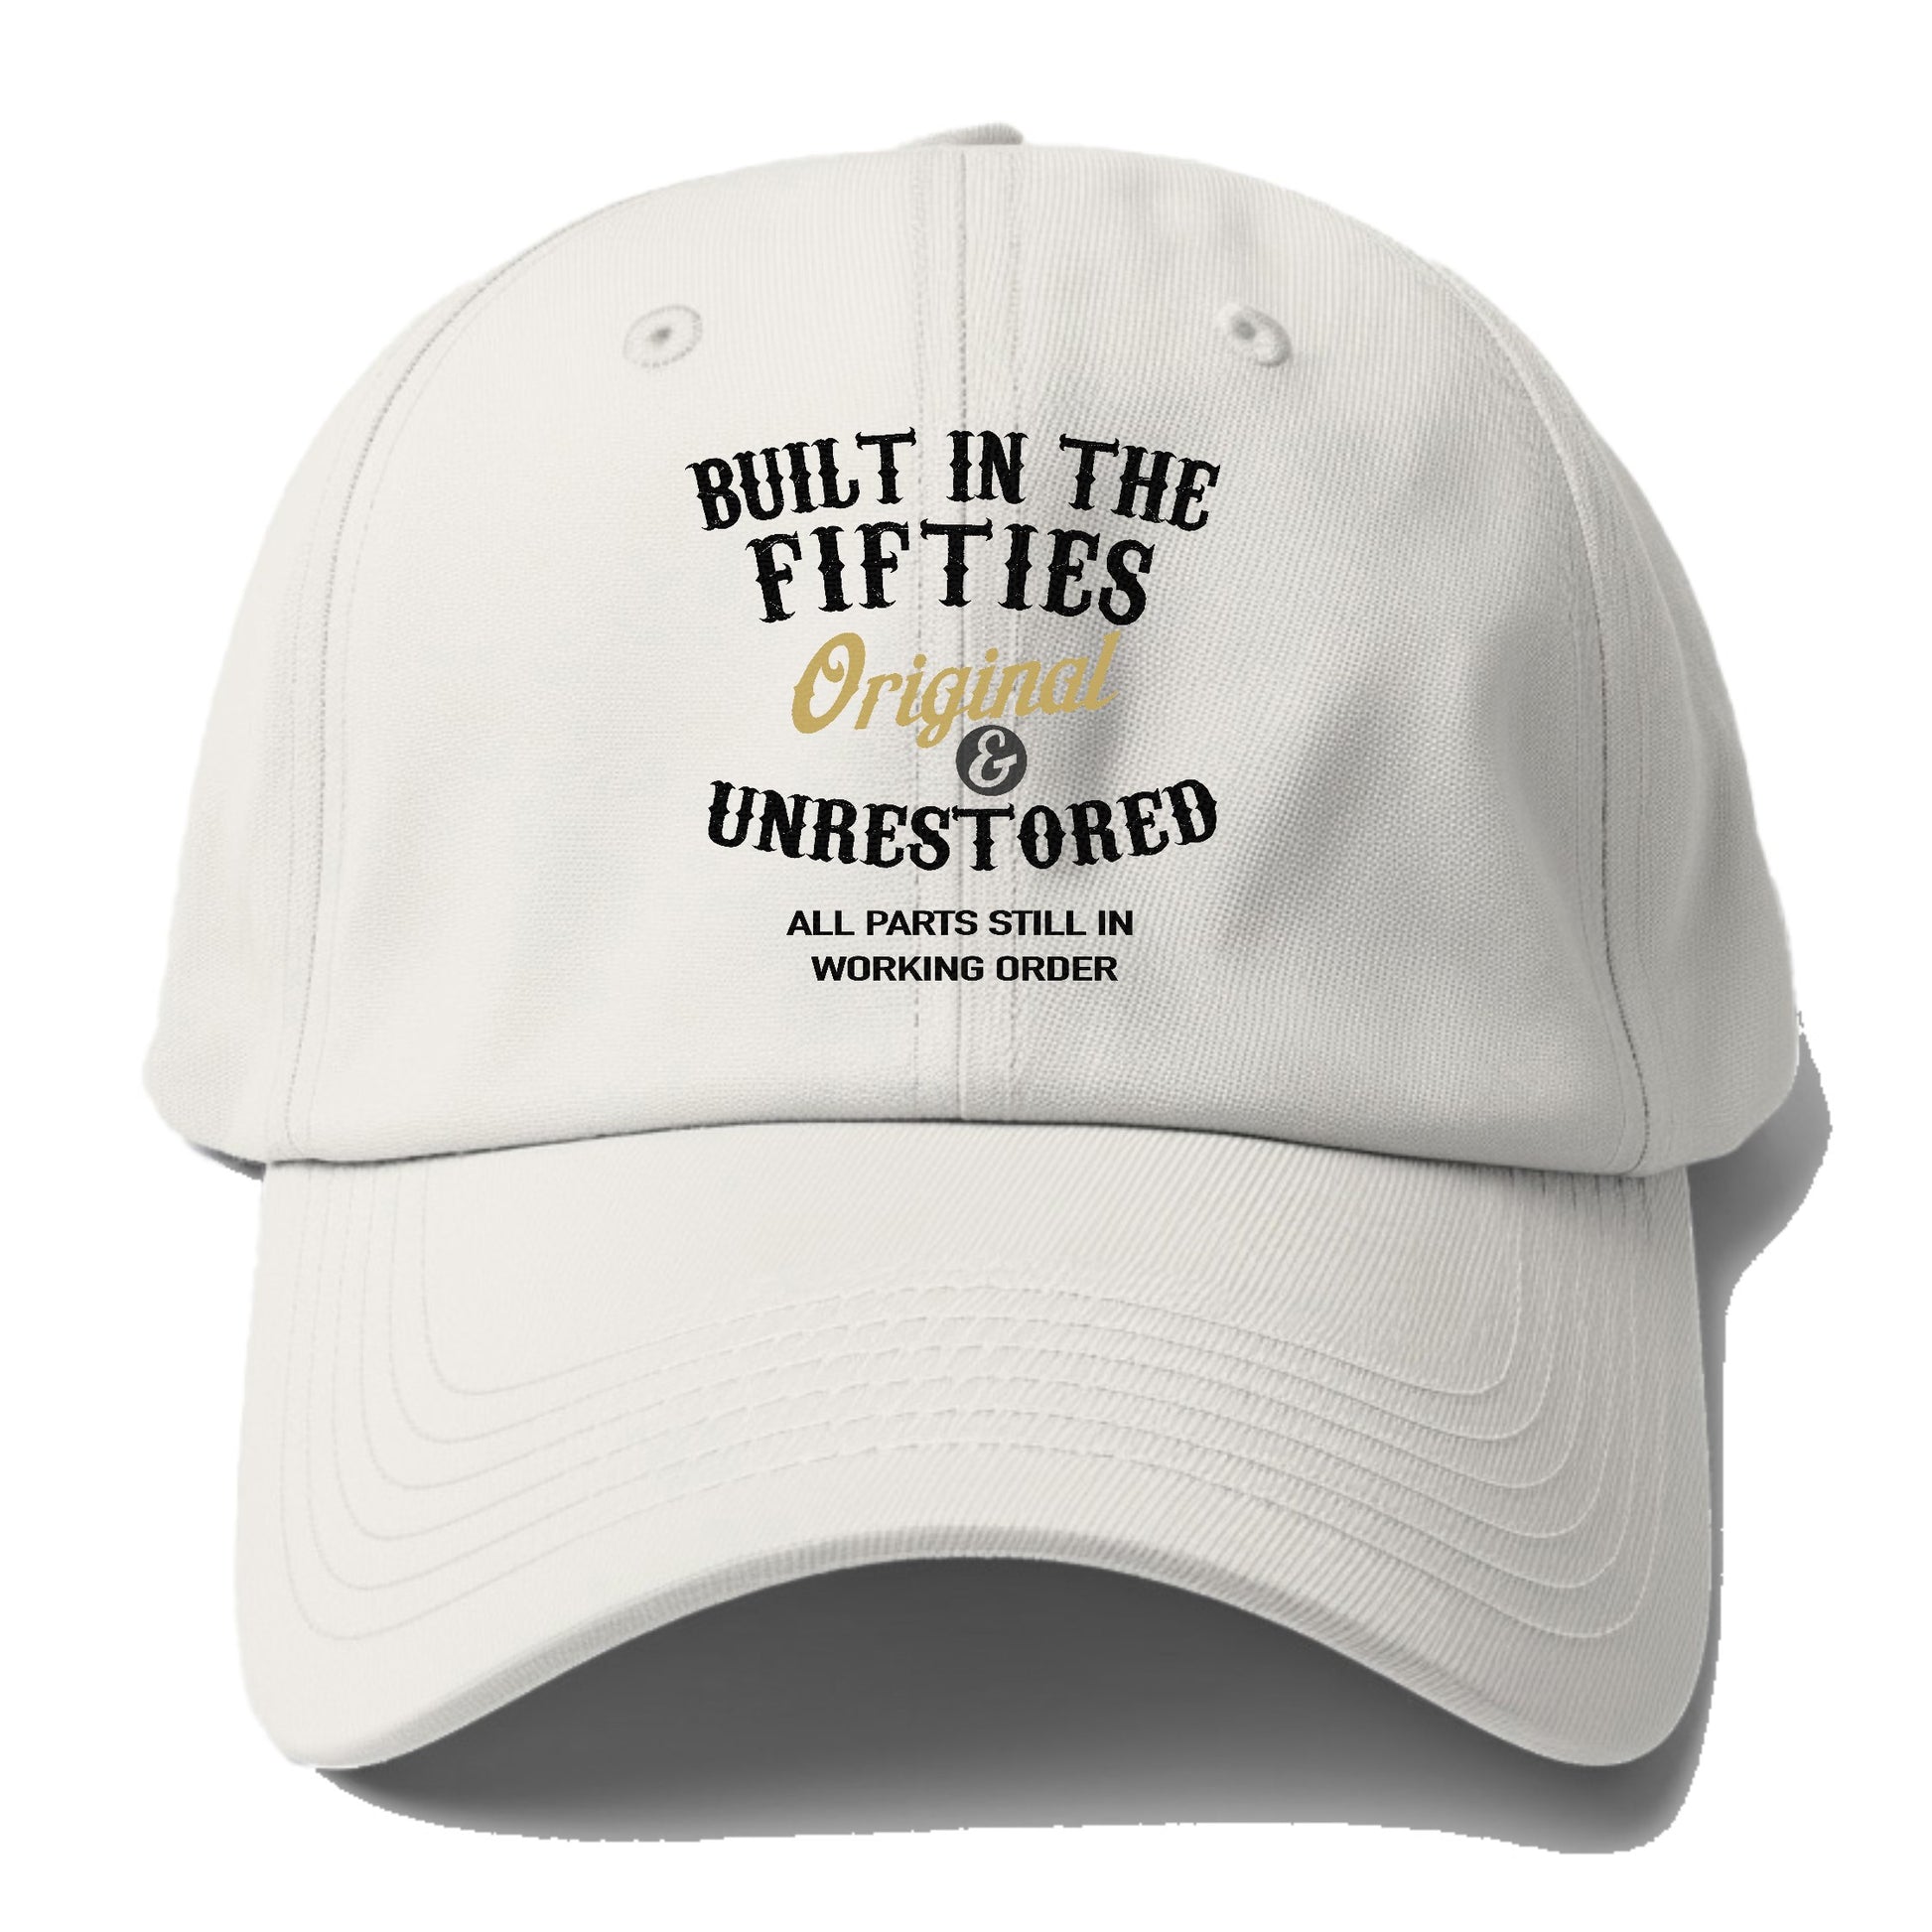 Build in The Fifties Original Unrestored All Parts Still in Working Order Baseball Cap for Big Heads Pink